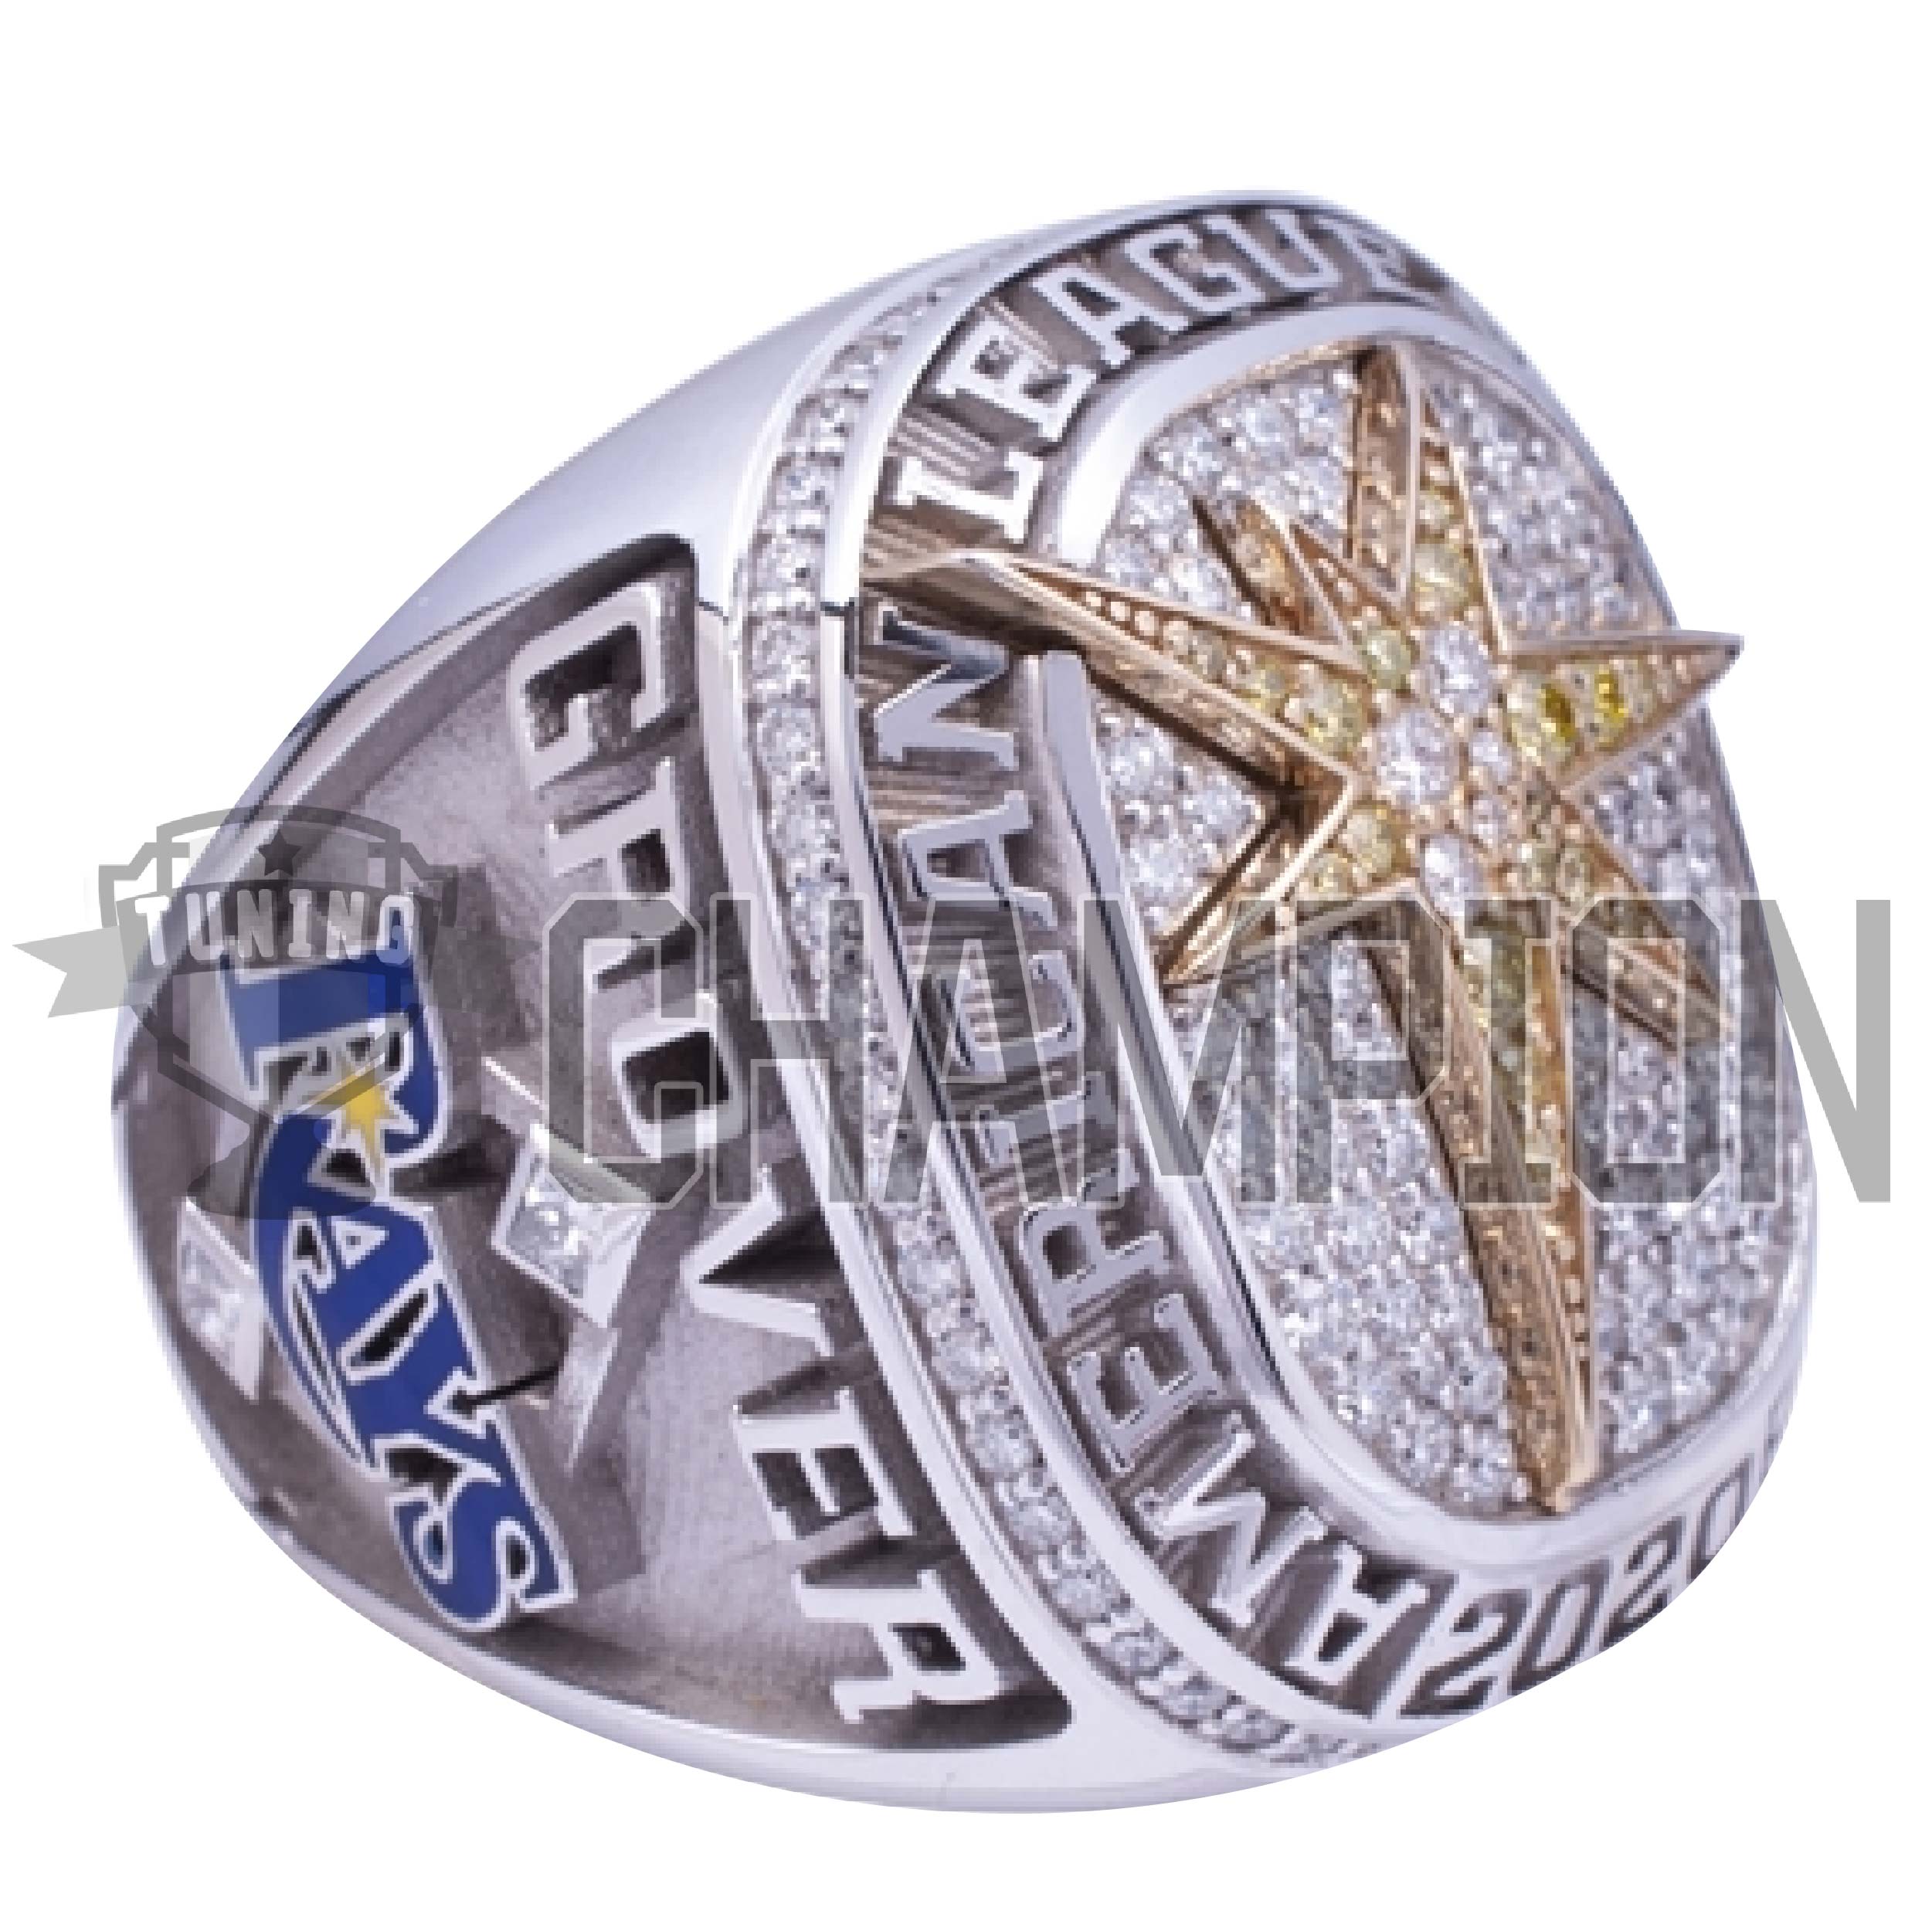 Rays receive 2020 American League championship rings